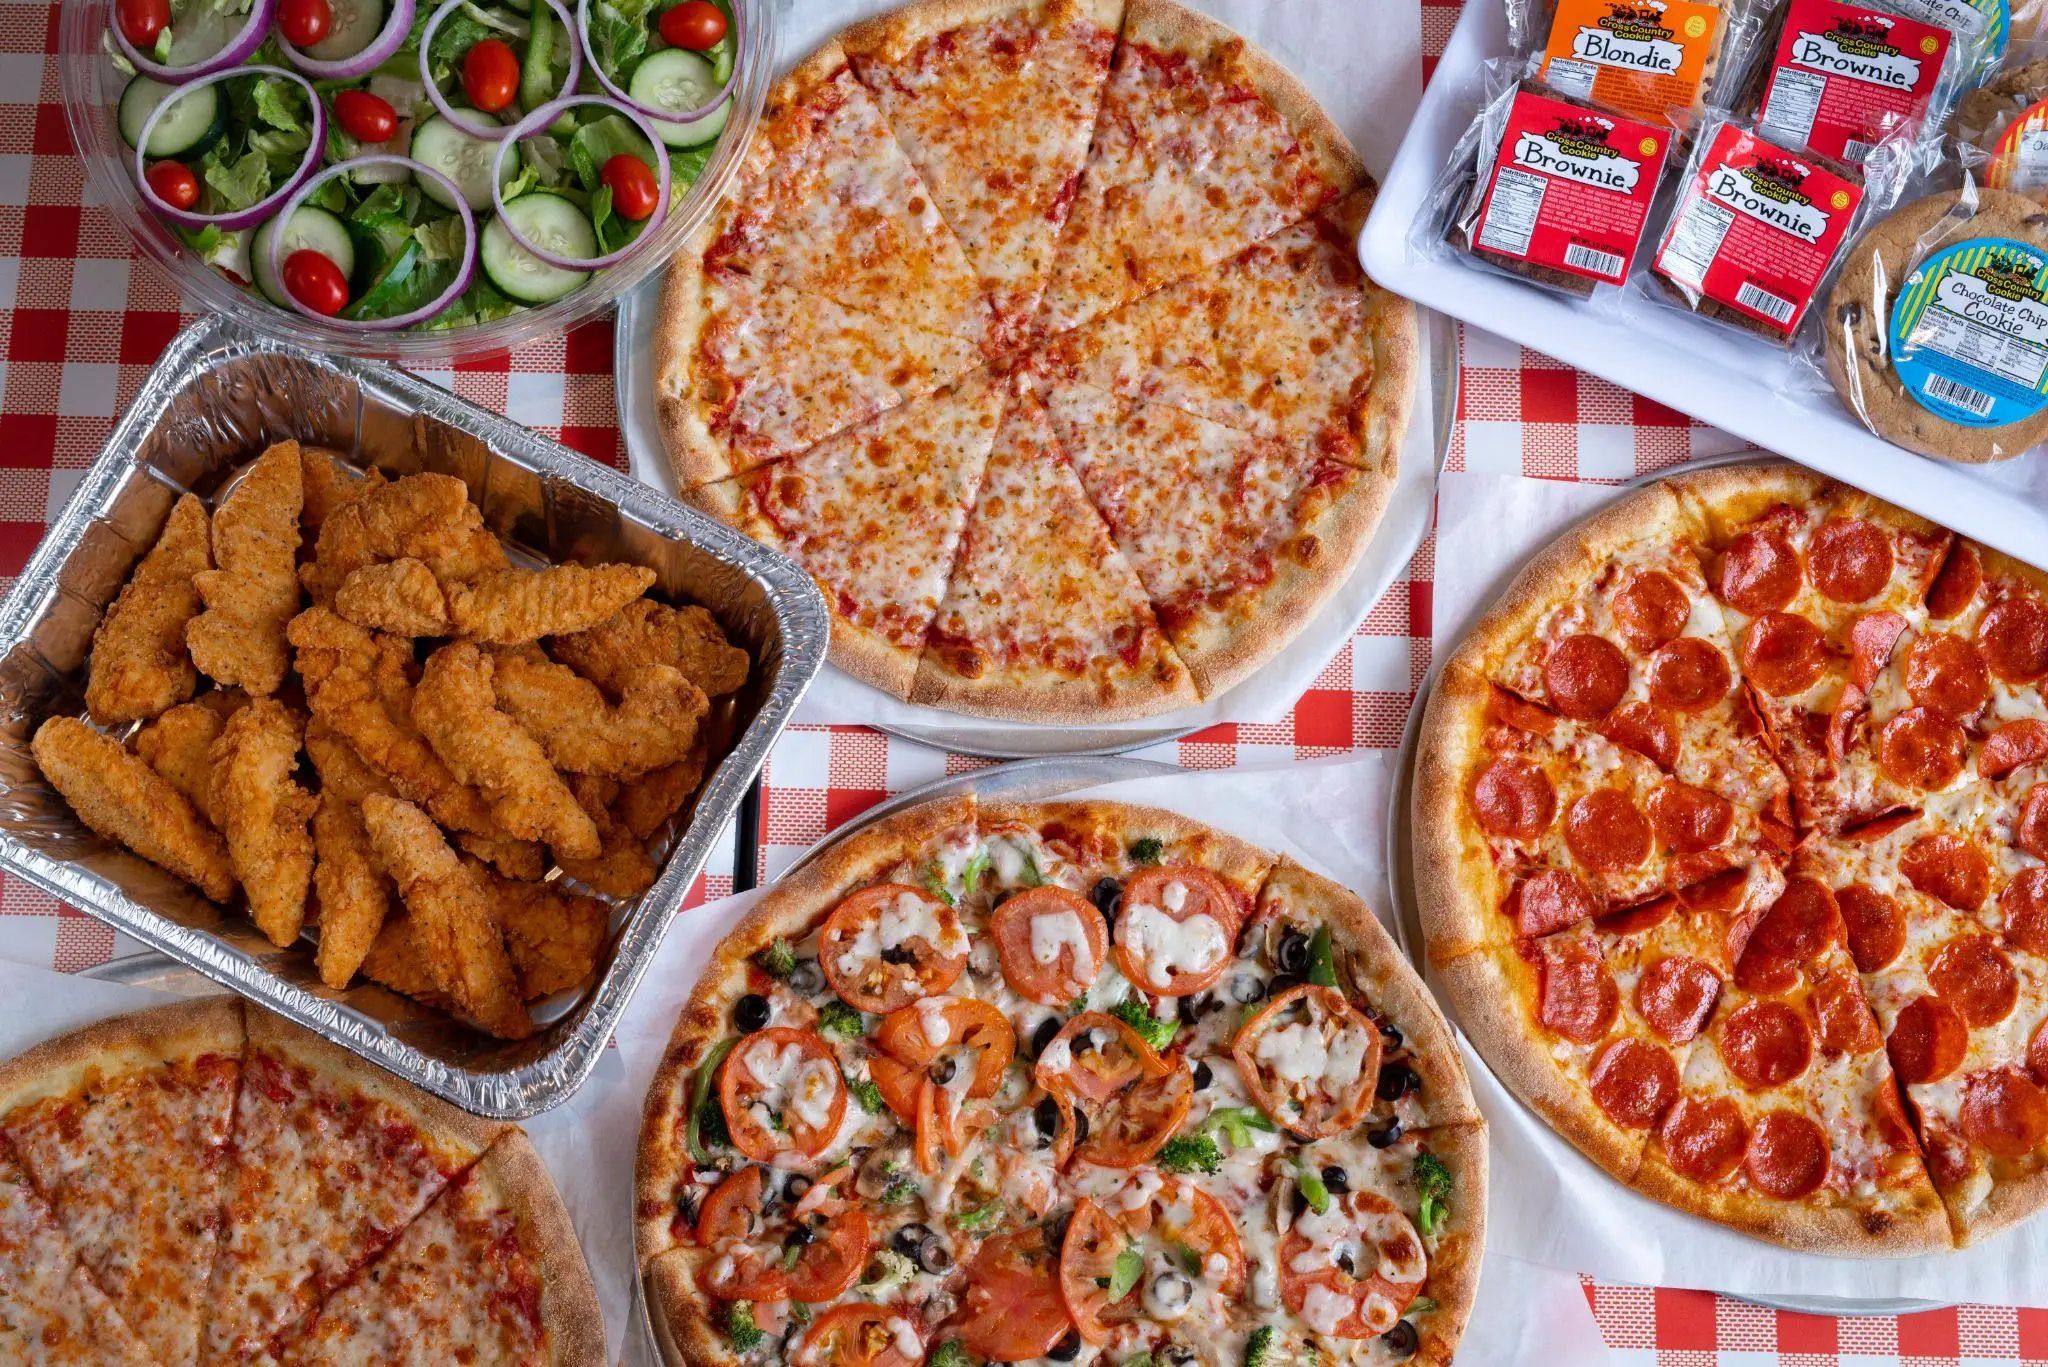 Papa Gino's National Pizza Party Day Get 20% Off Orders of $200 or More